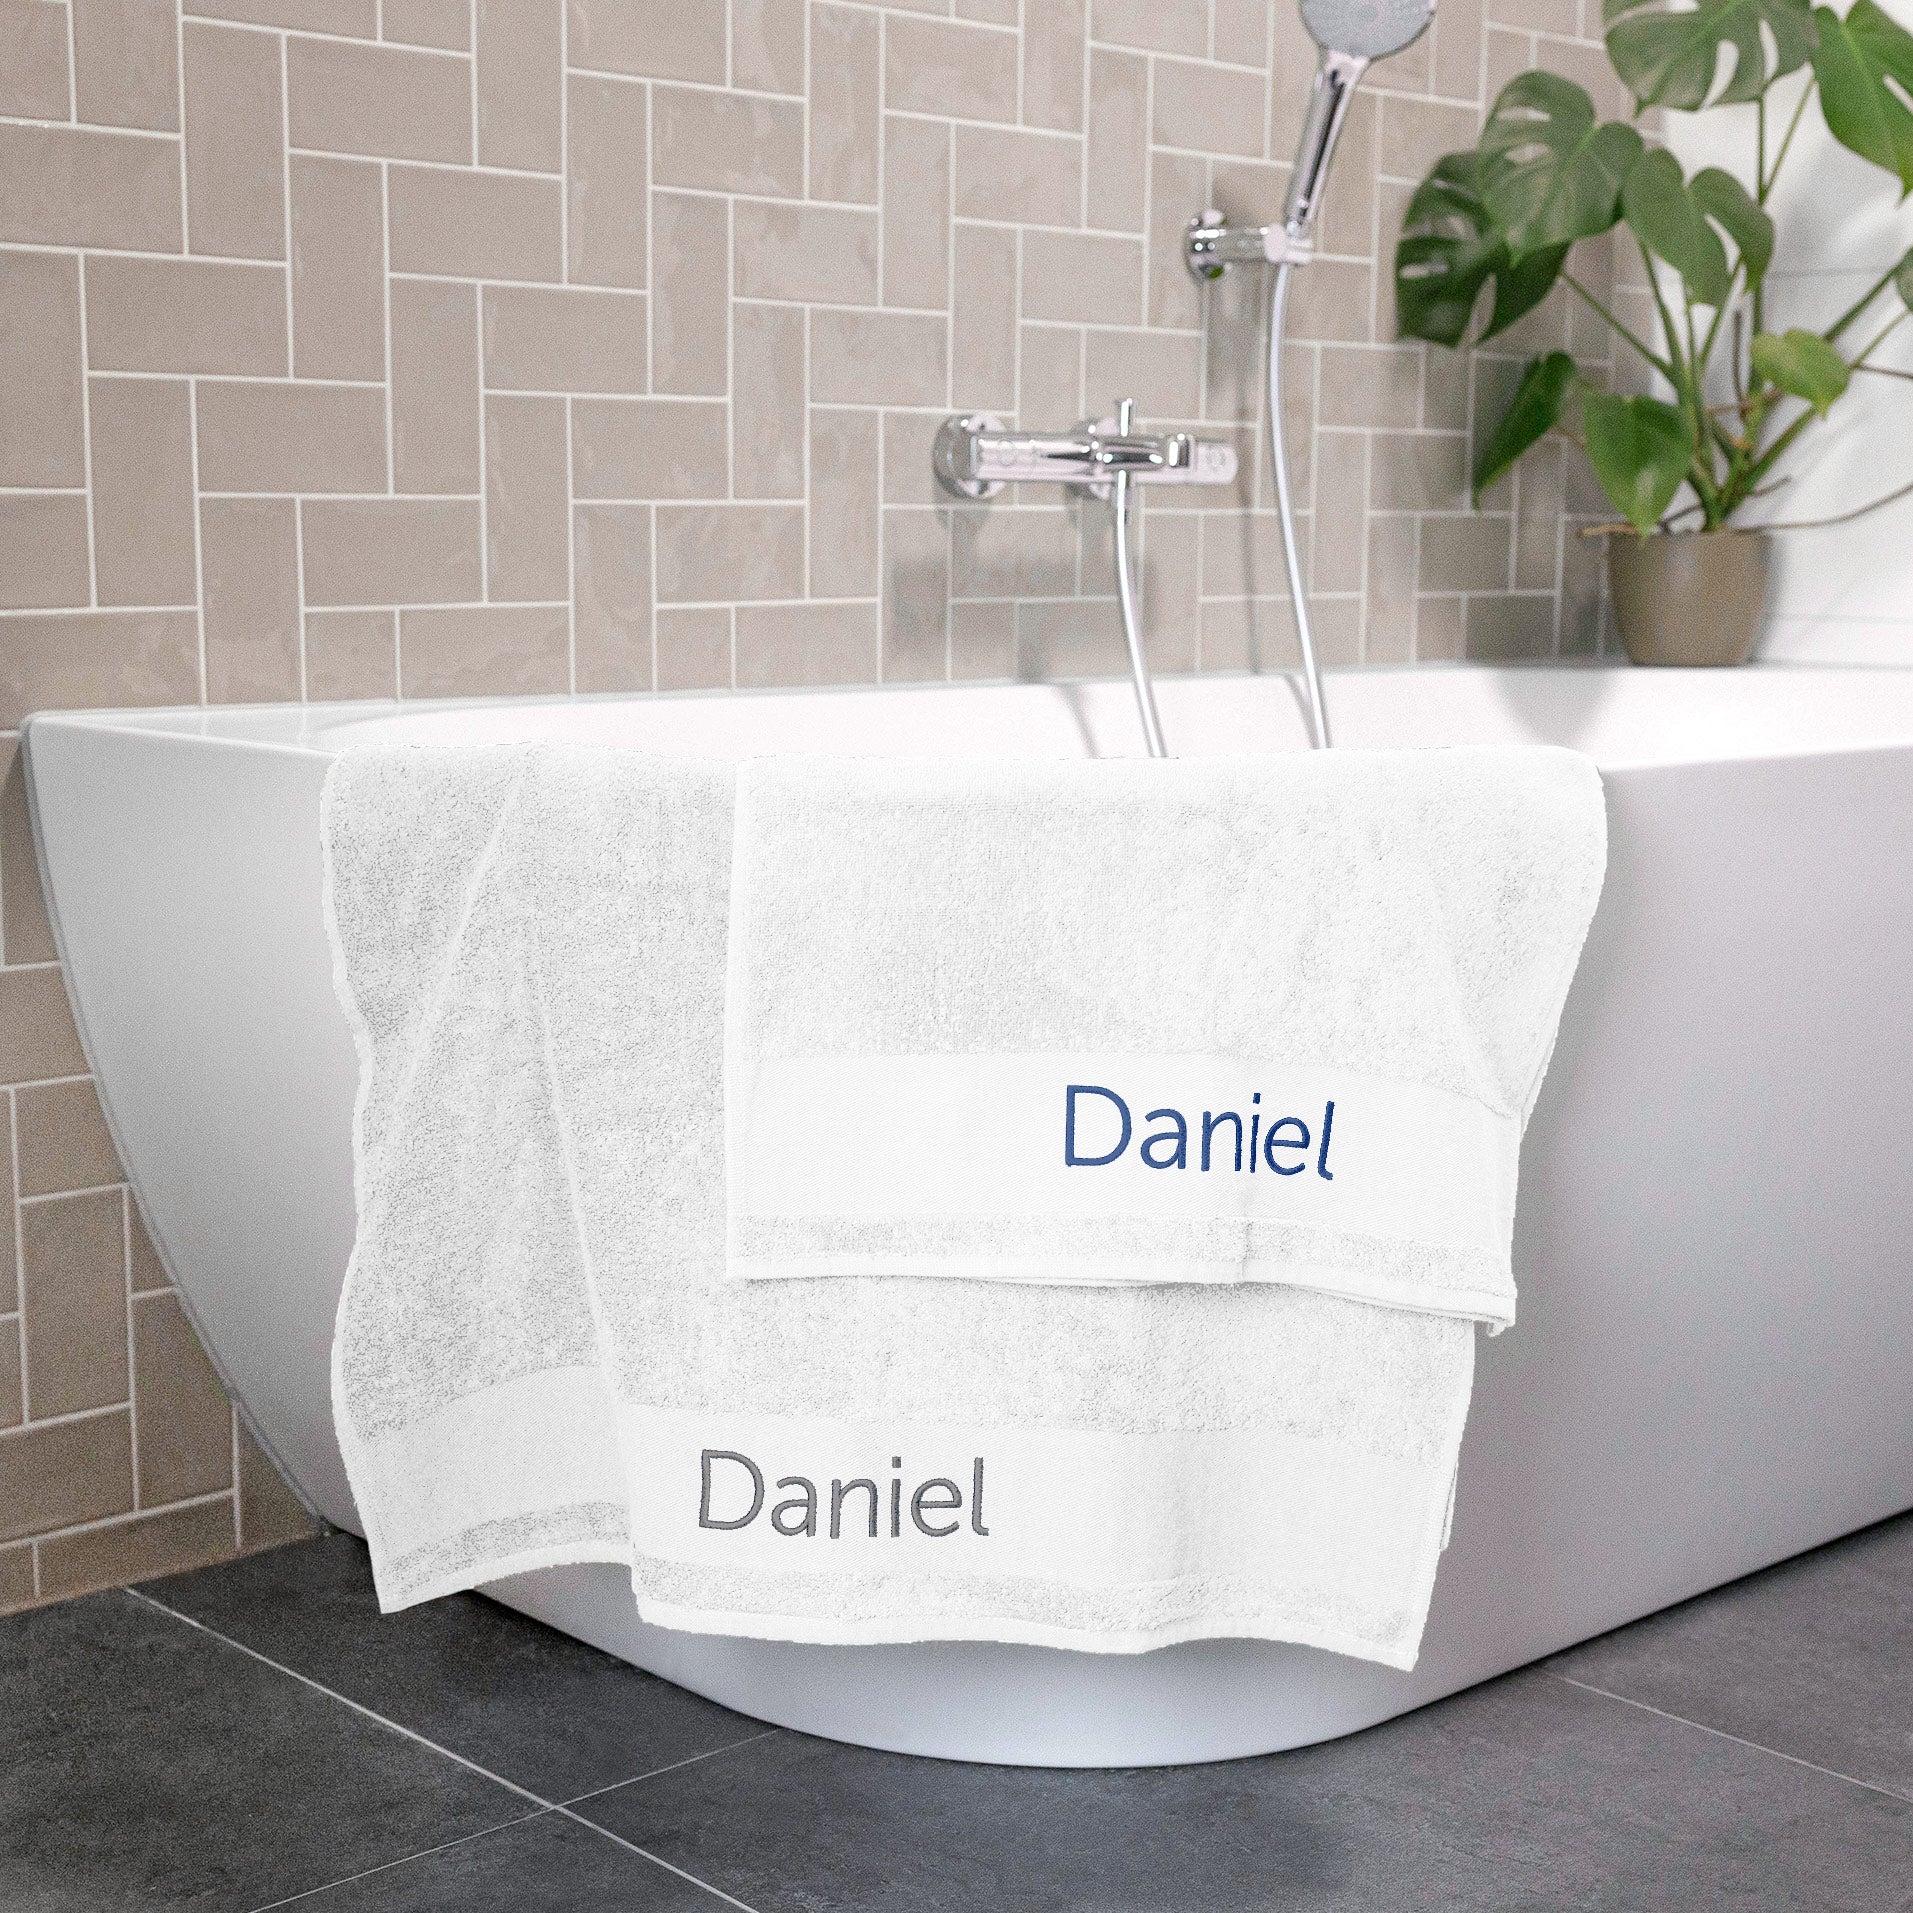 Personalised towel - Embroidered - White - 50 x 100 cm